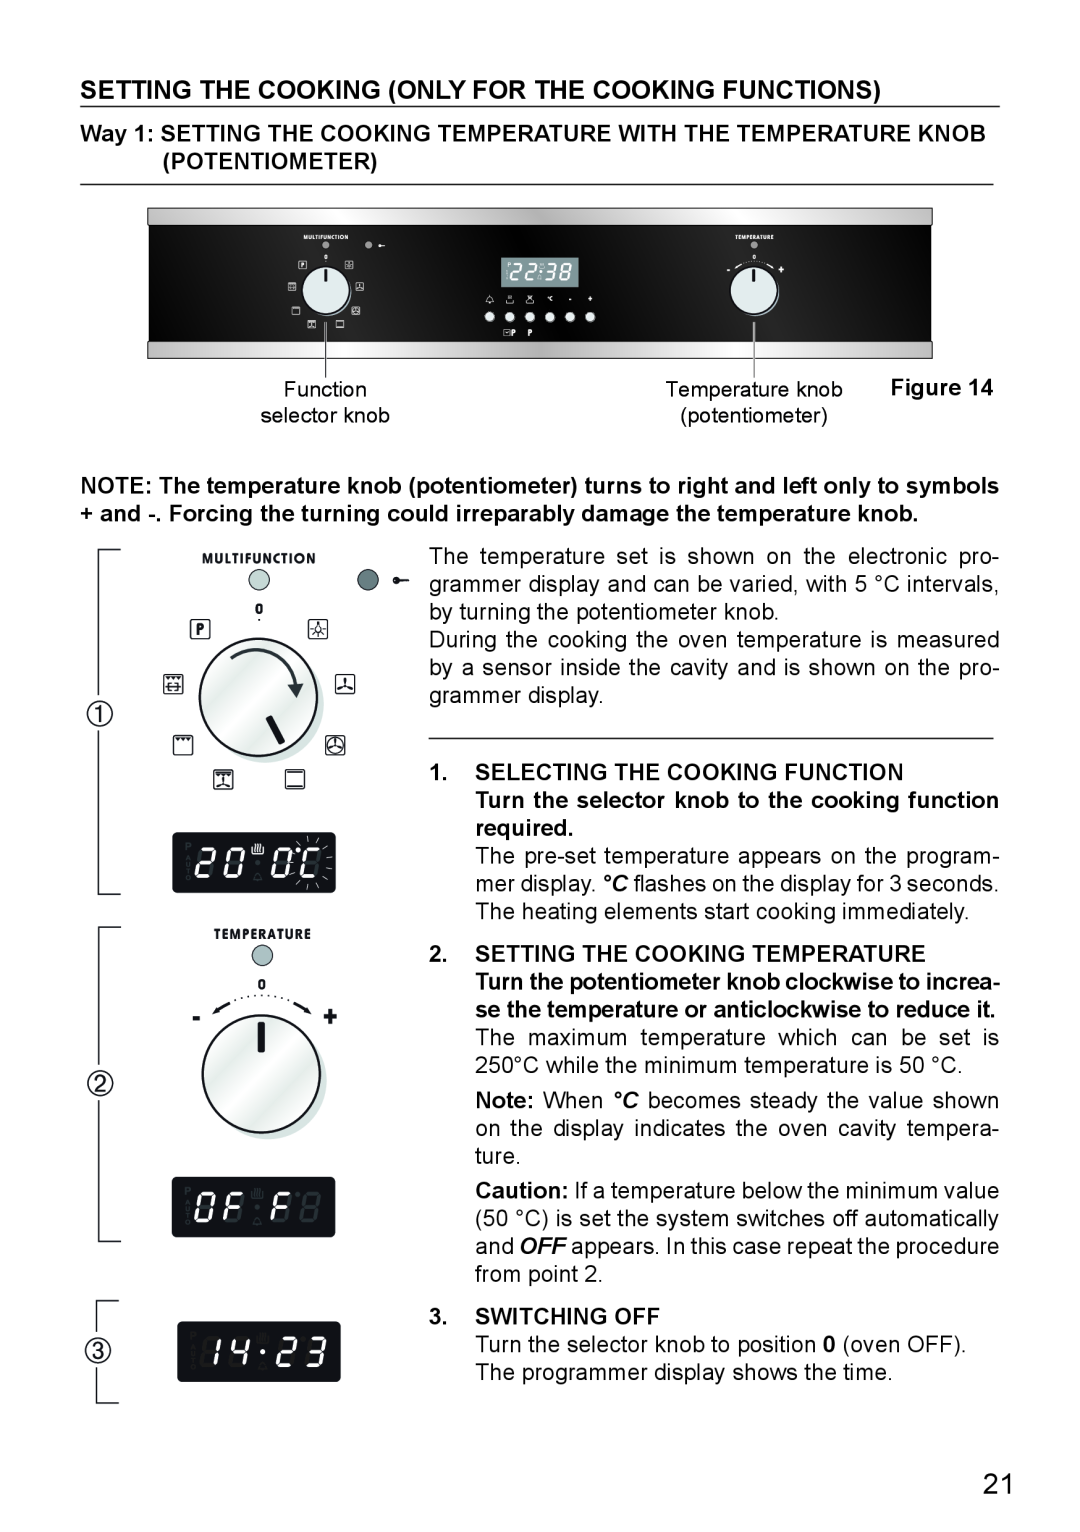 DeLonghi DE609MP manual Selecting The Cooking Function, Setting The Cooking Temperature, Switching Off 